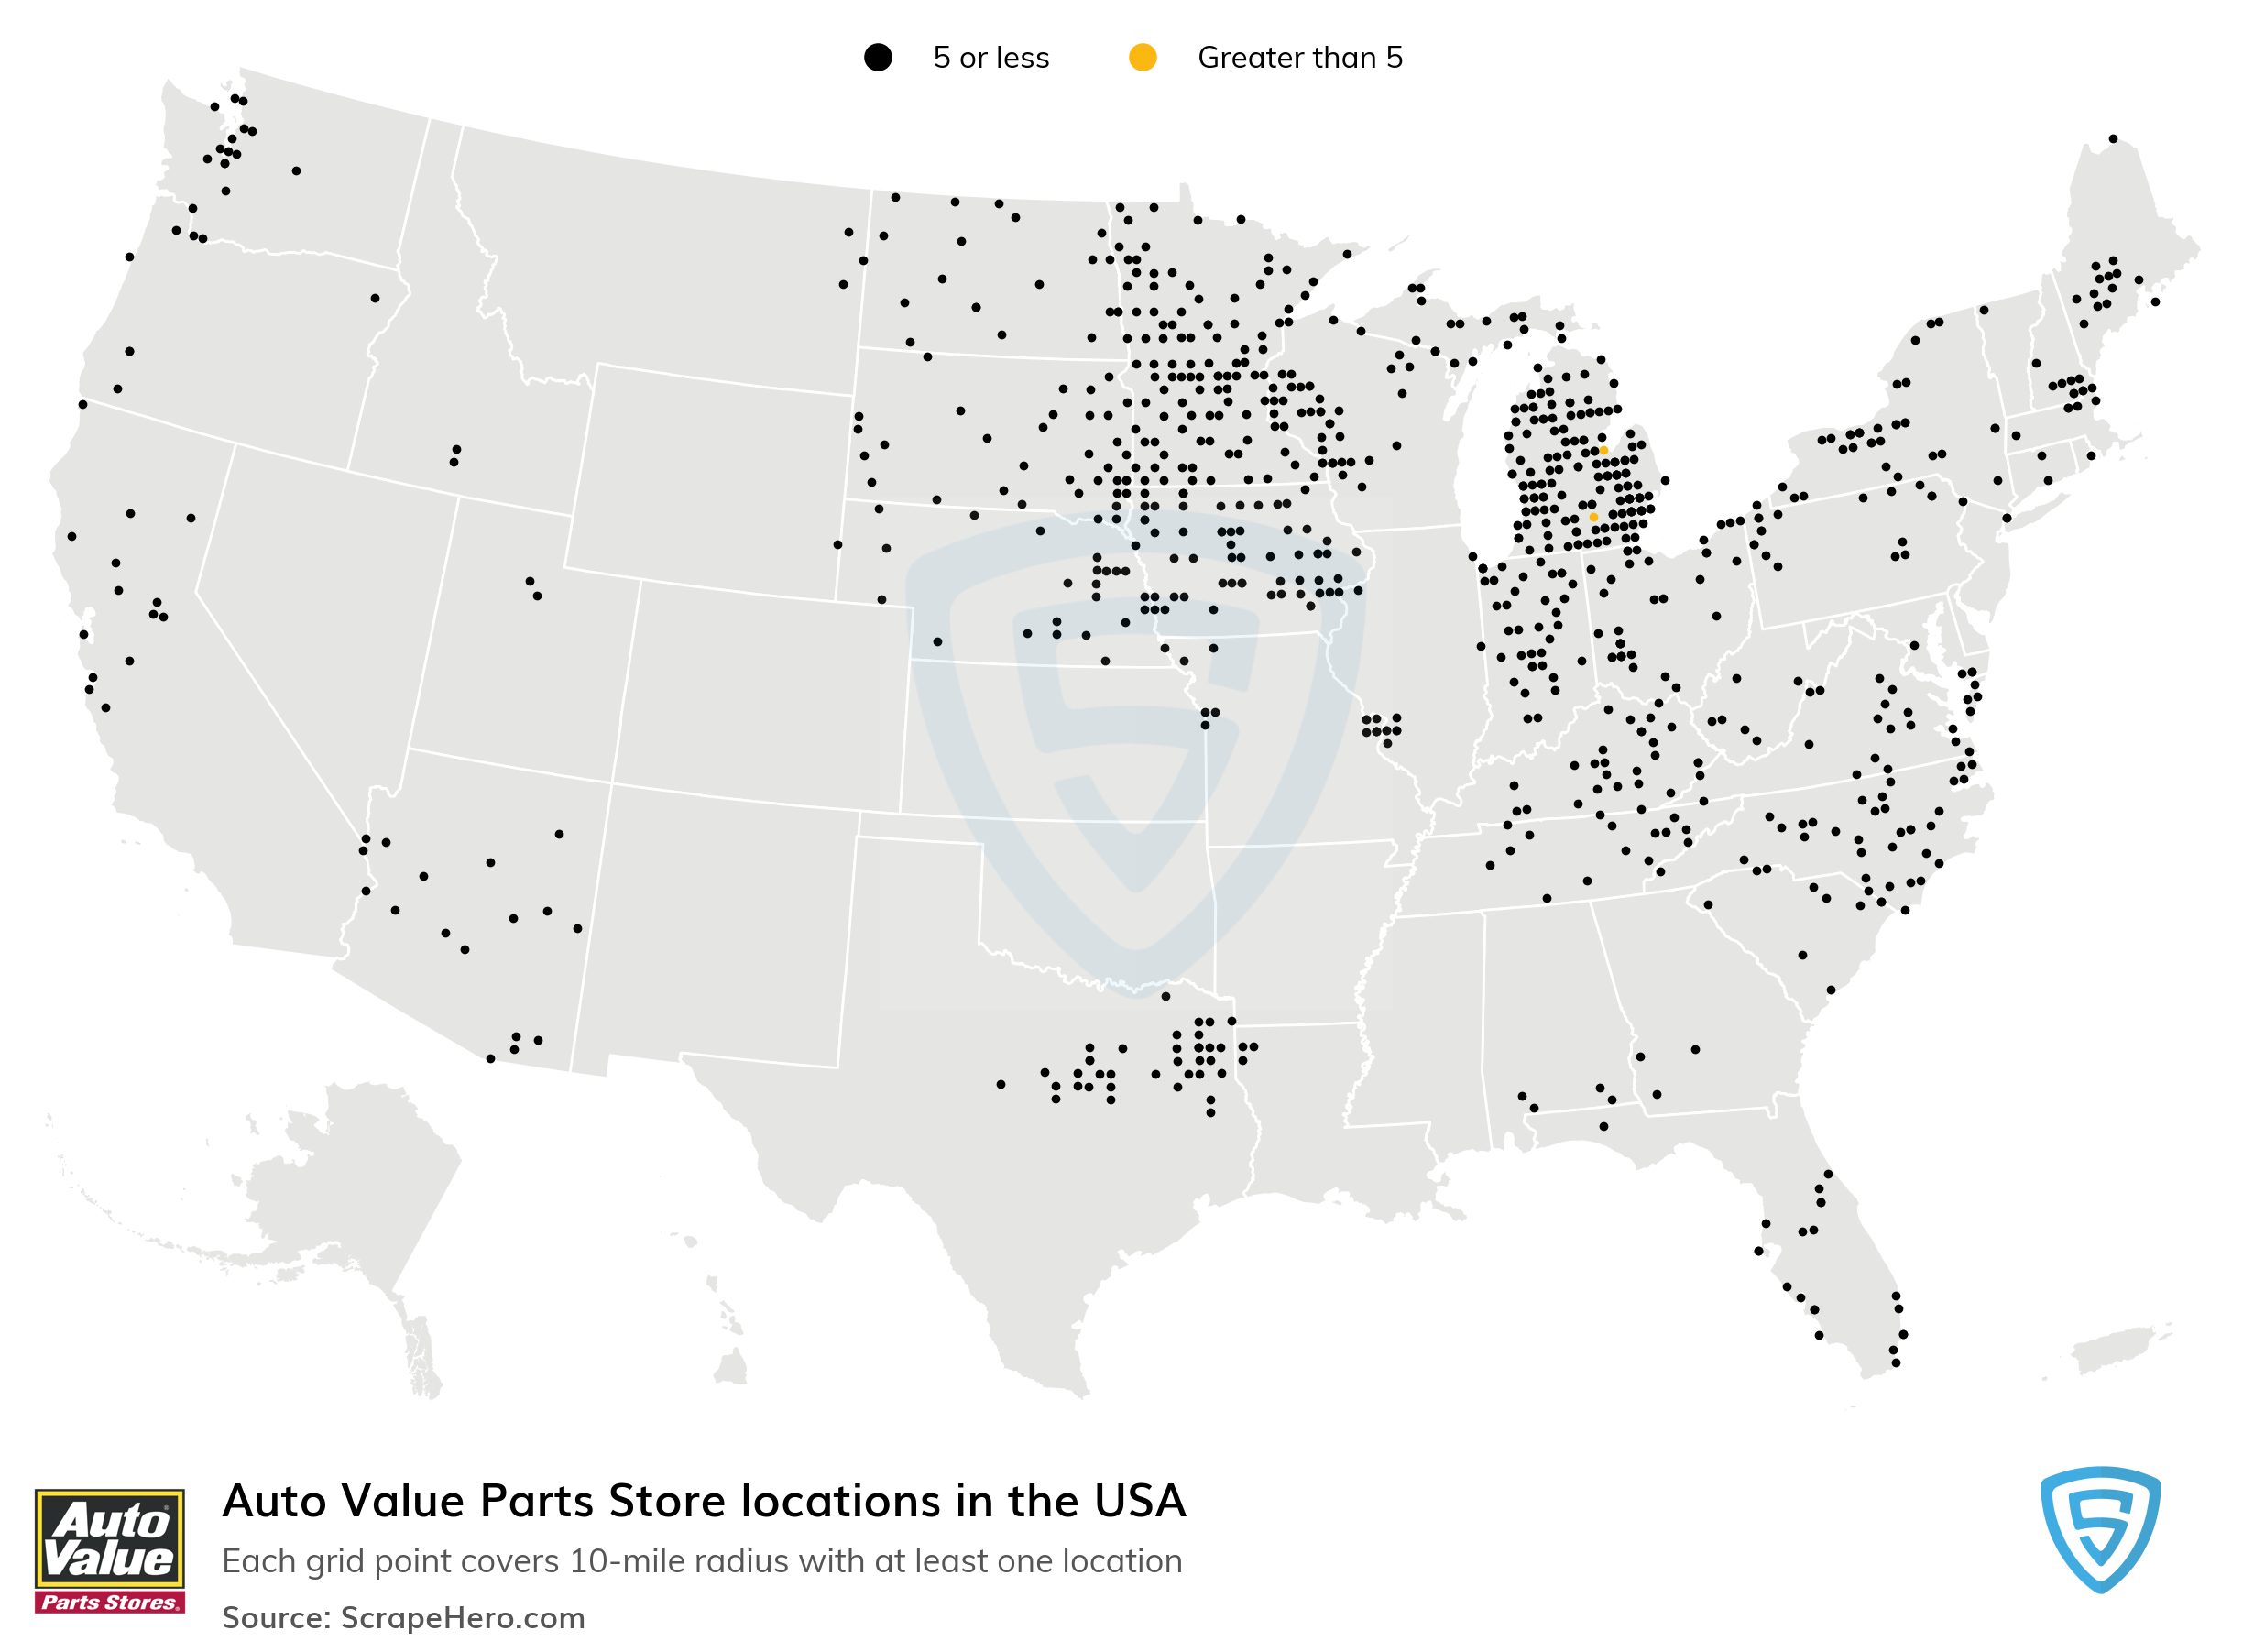 Largest Auto Parts Stores in the US - Location Analysis